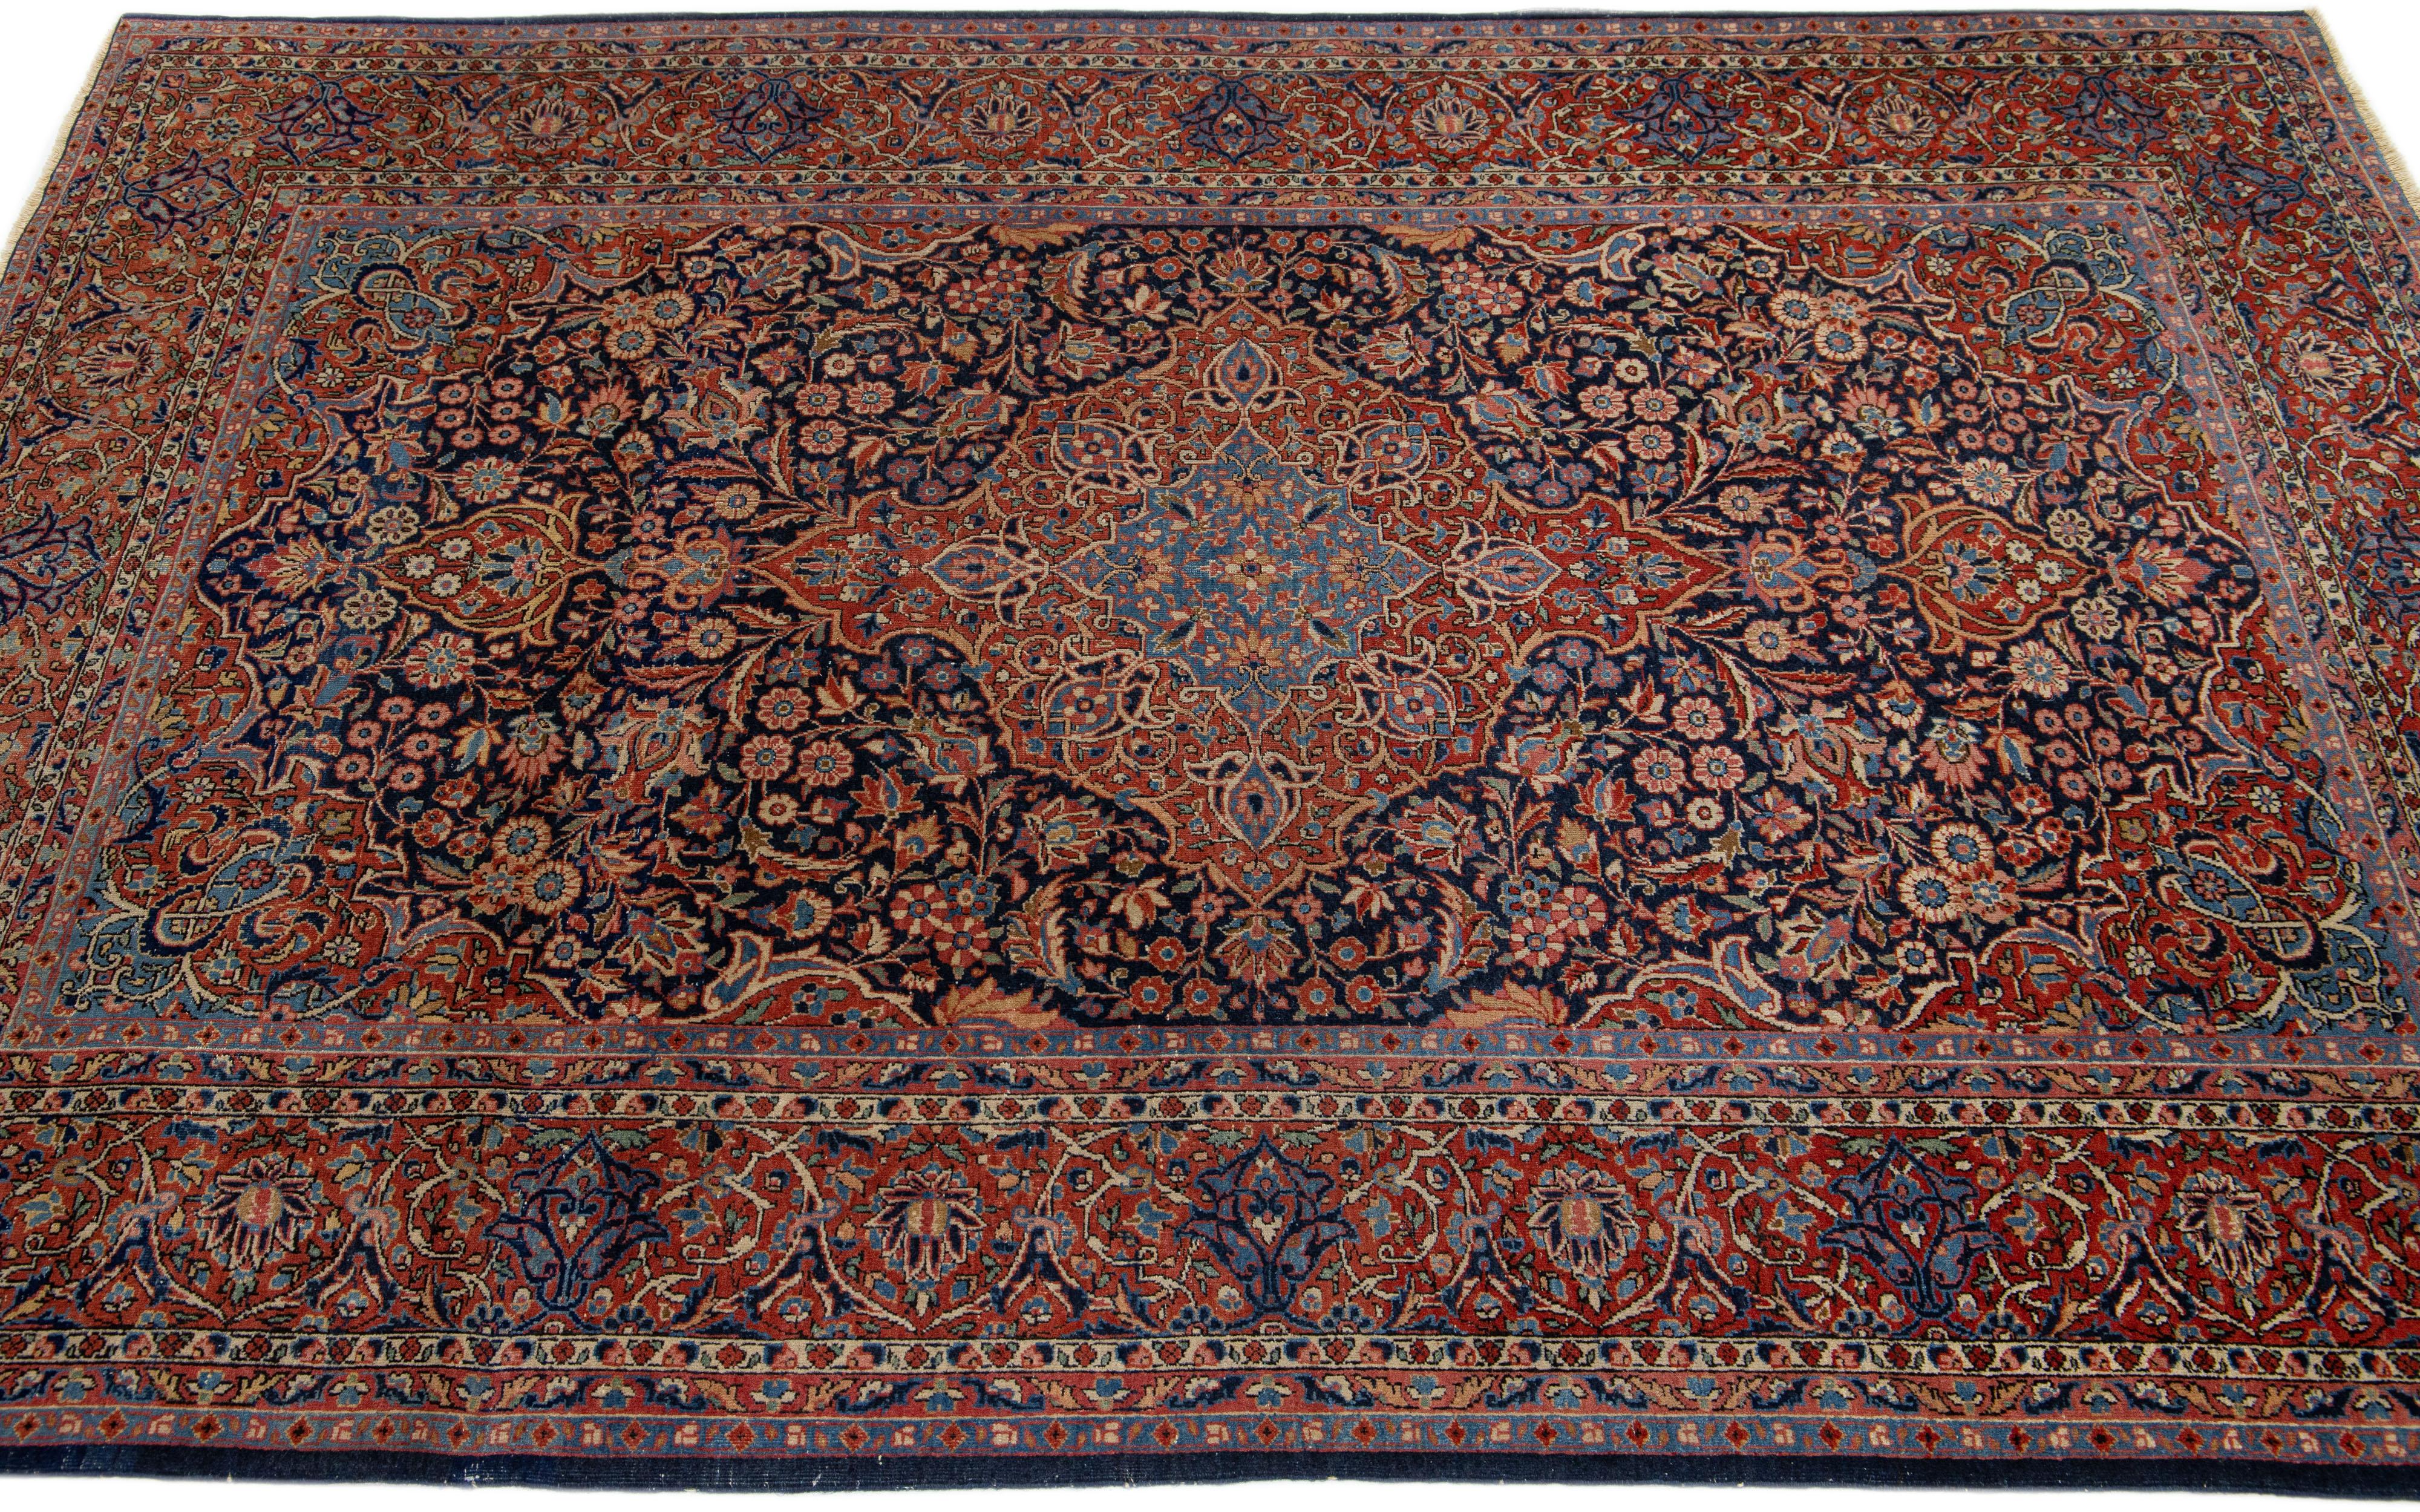 Antique Persian Kashan Handmade Medallion Blue and Red Scatter Wool Rug In Good Condition For Sale In Norwalk, CT